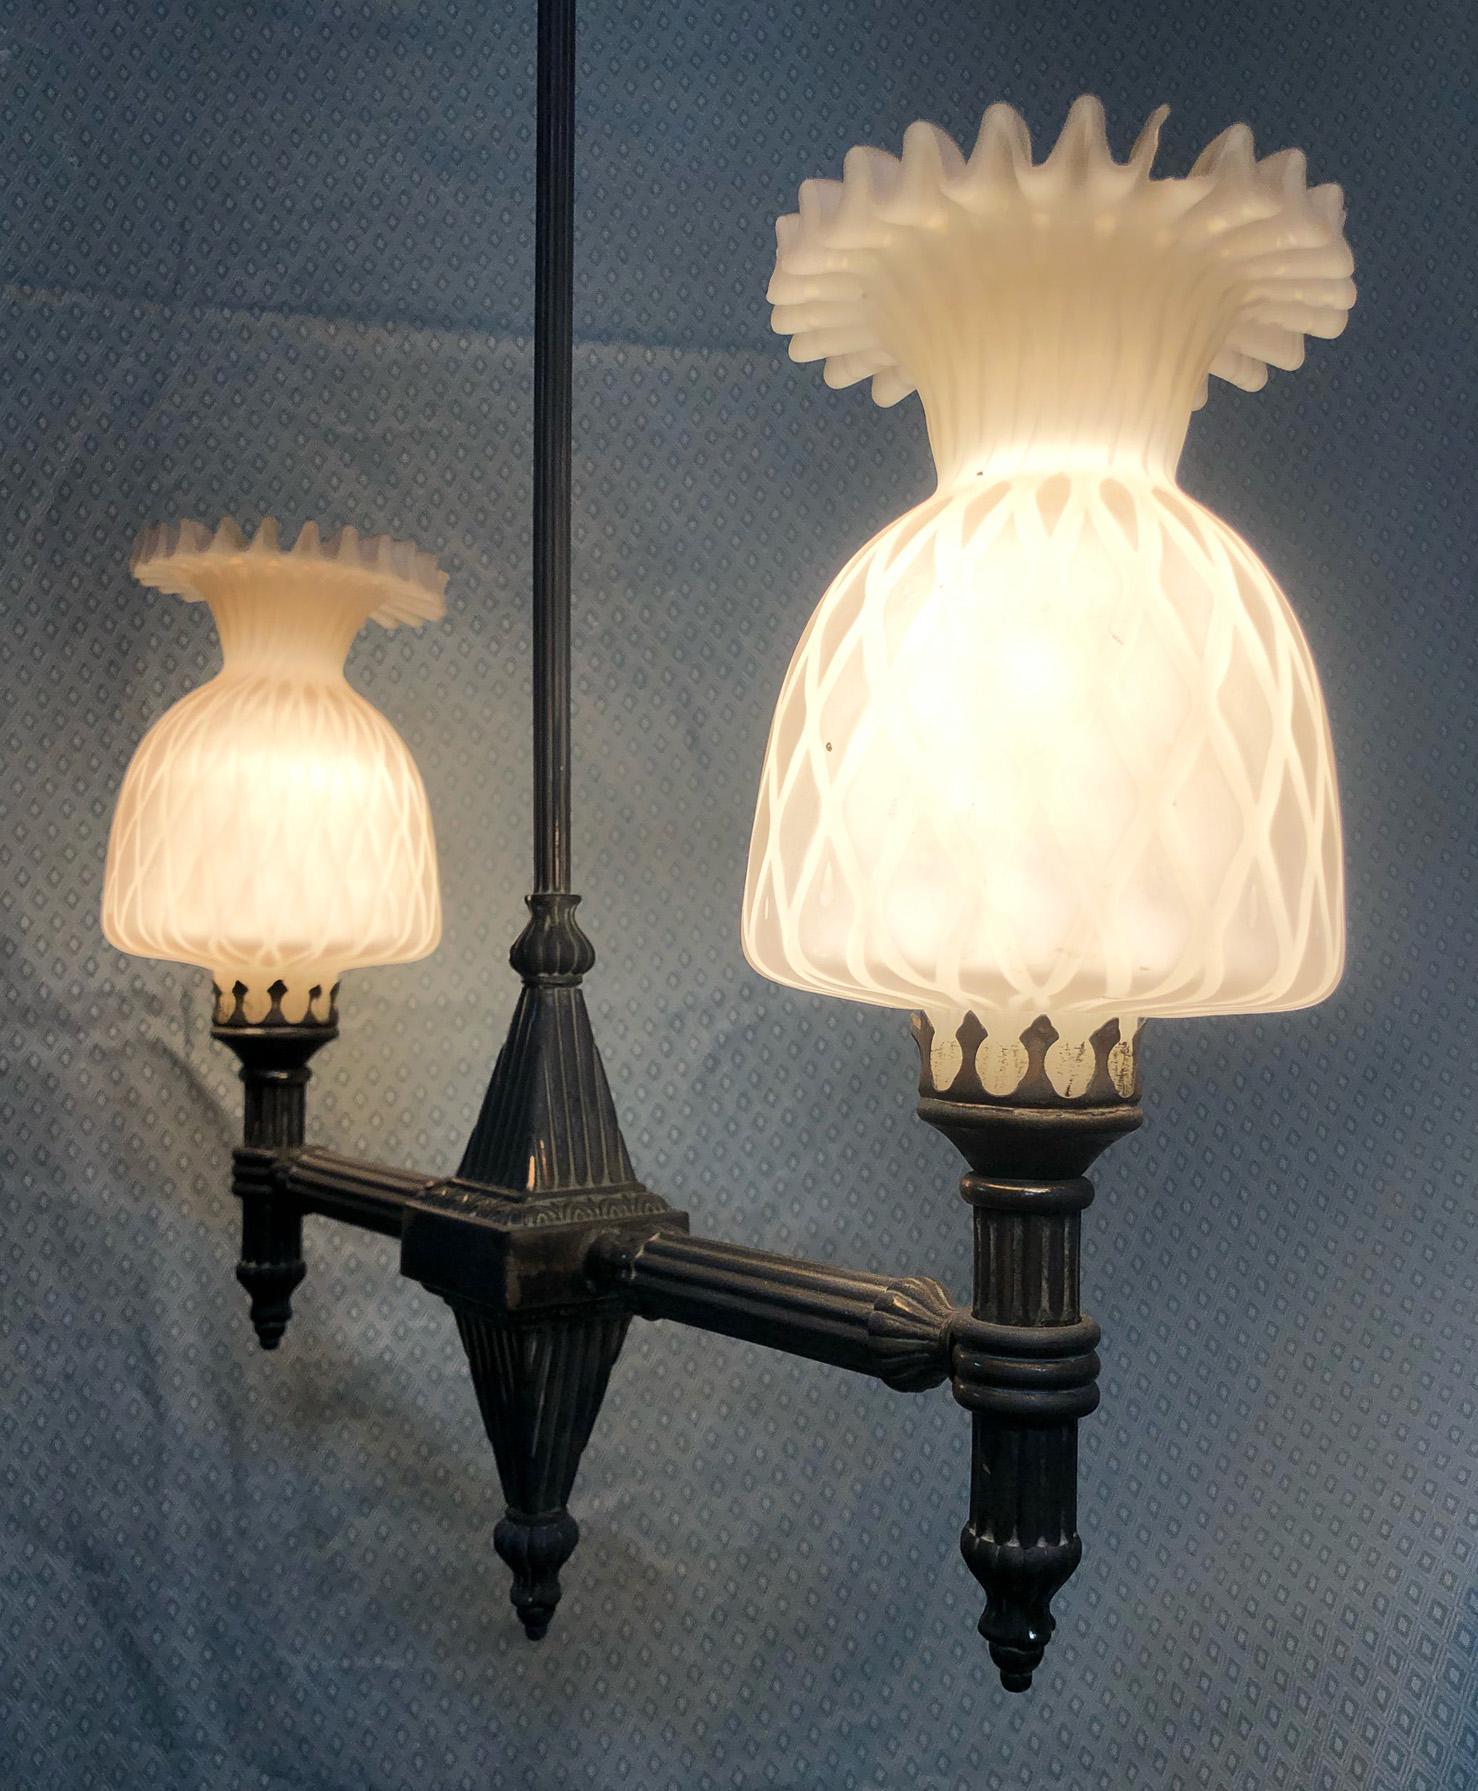 Renaissance Revival Italian Two-Light Chandelier from 20th with Original Glass